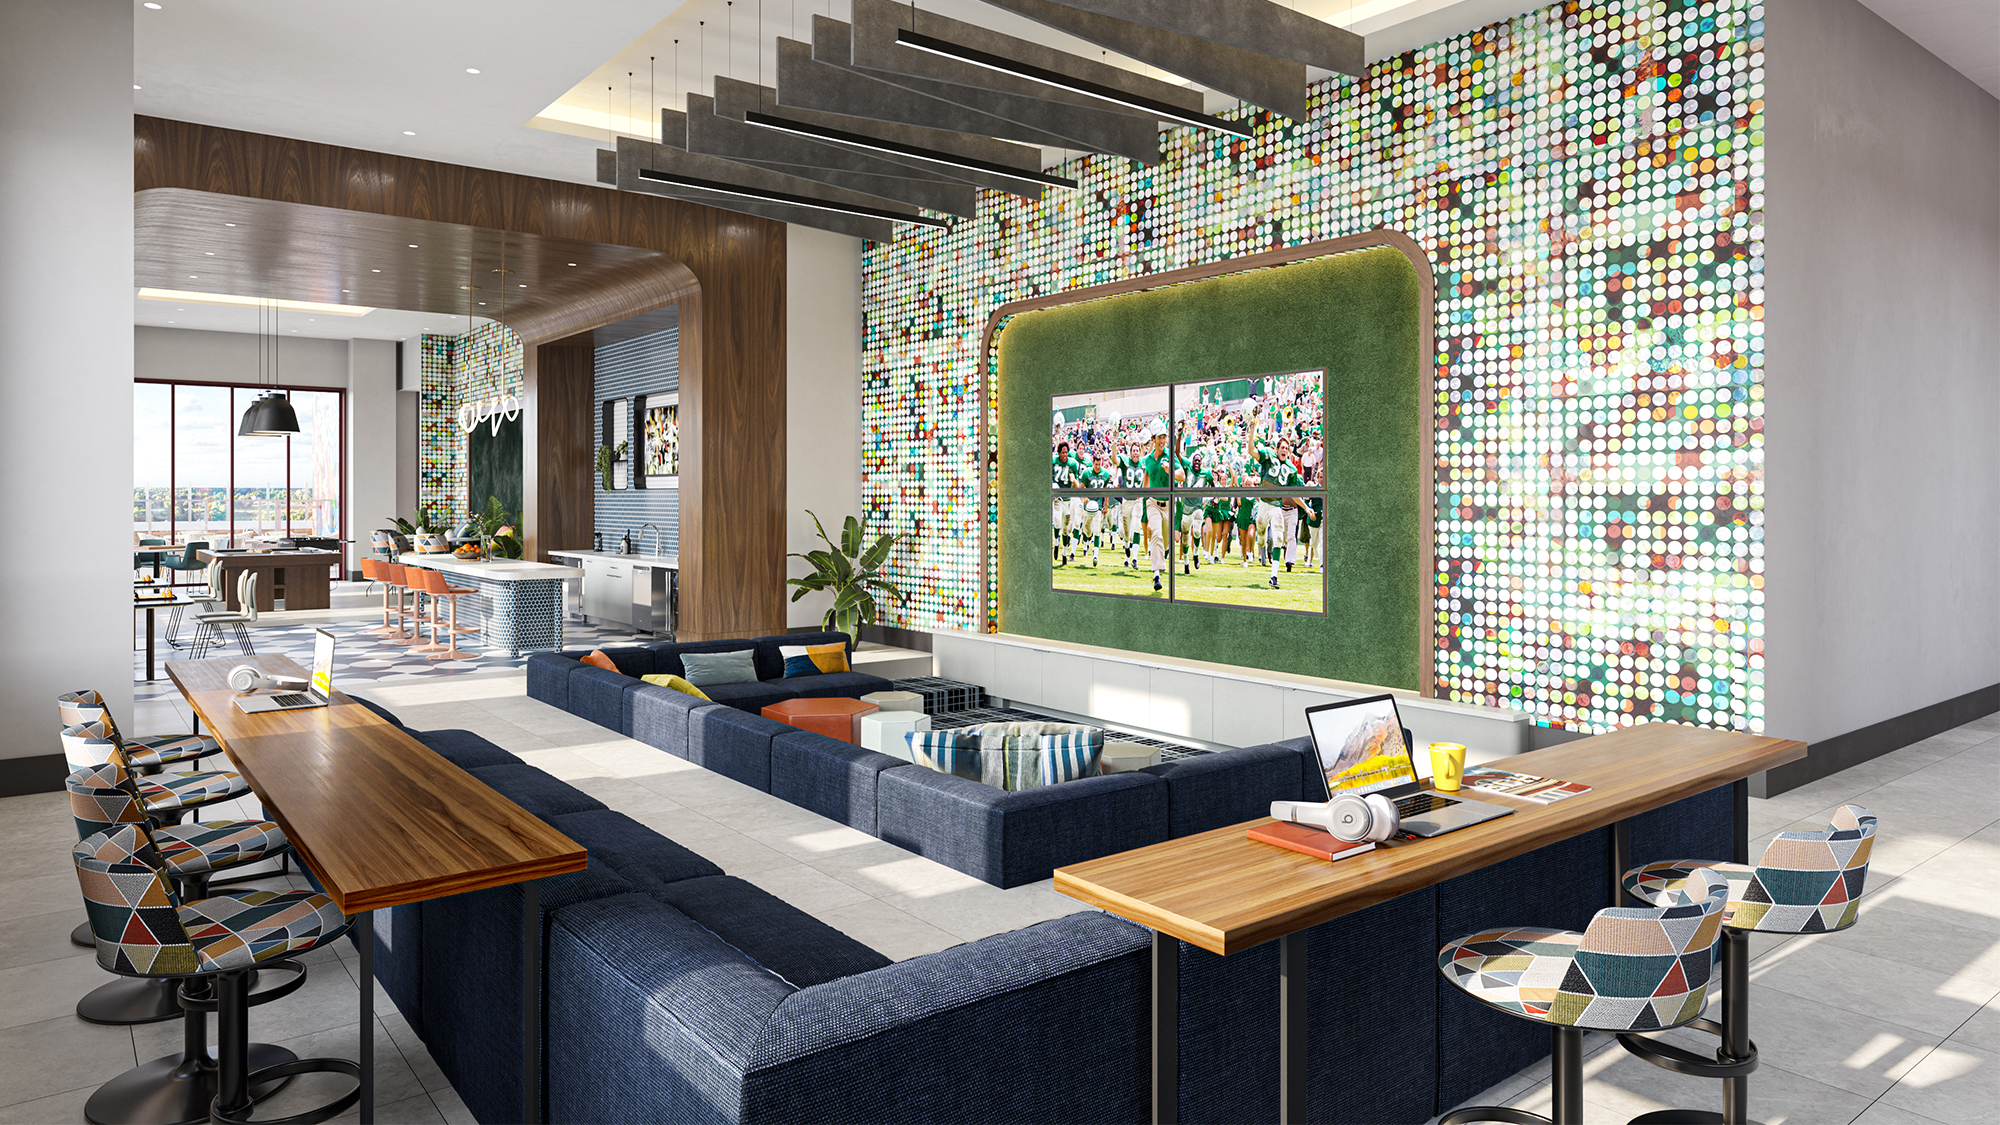 Resident lounge with large TV screens, blue couches, counter seating, and accent wall with a colorful circular pattern.